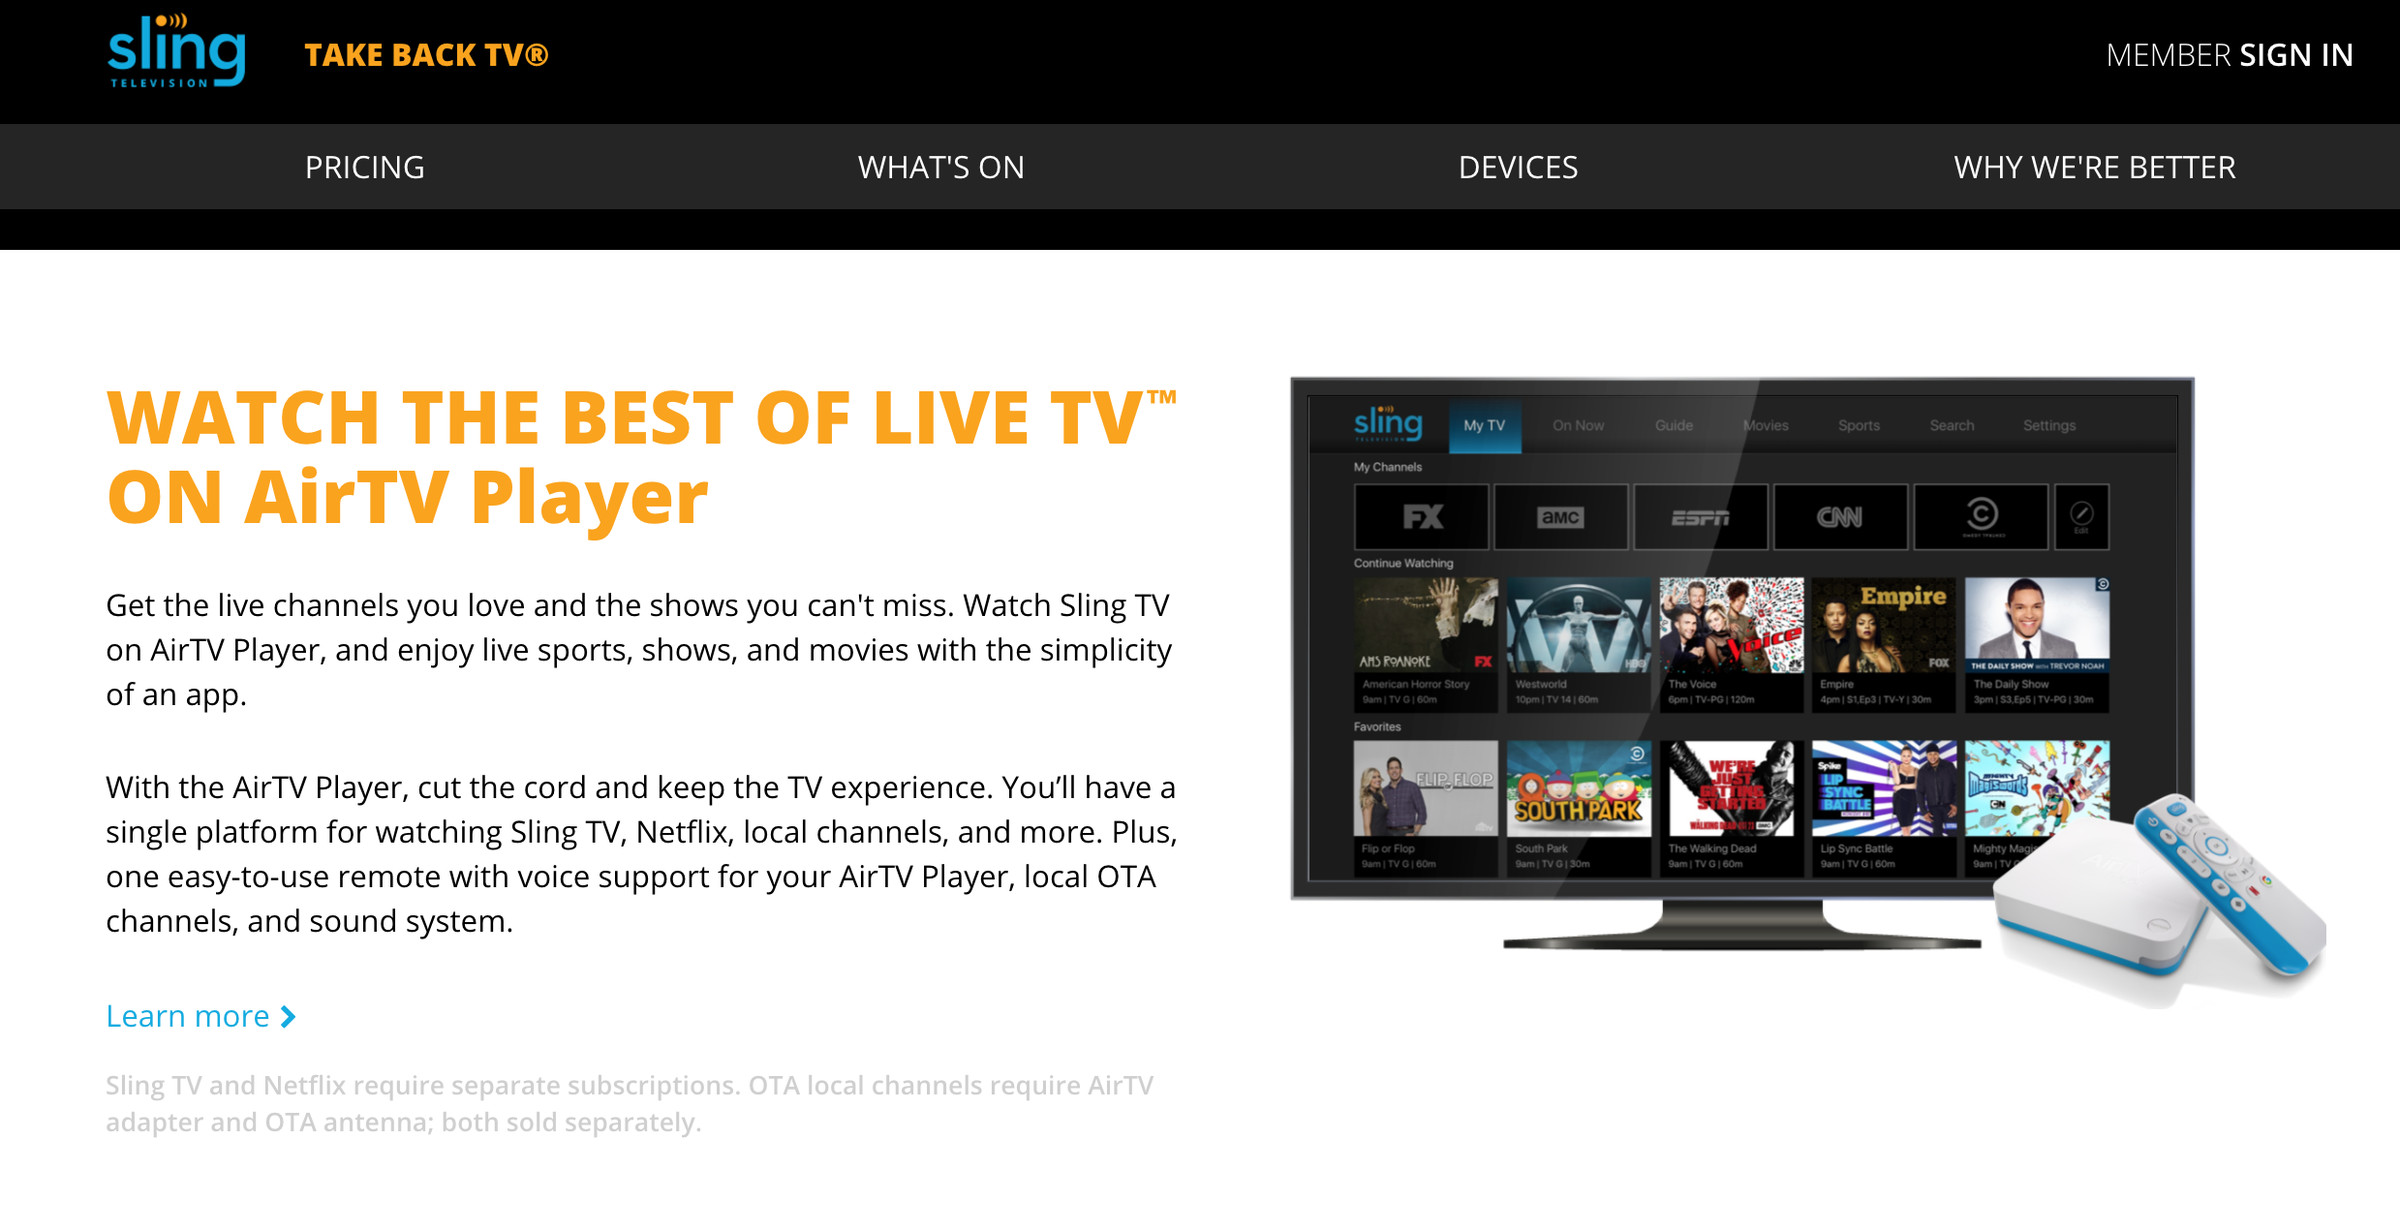 Despite no official announcement, the AirTV Player already appears on Sling TV’s website. 